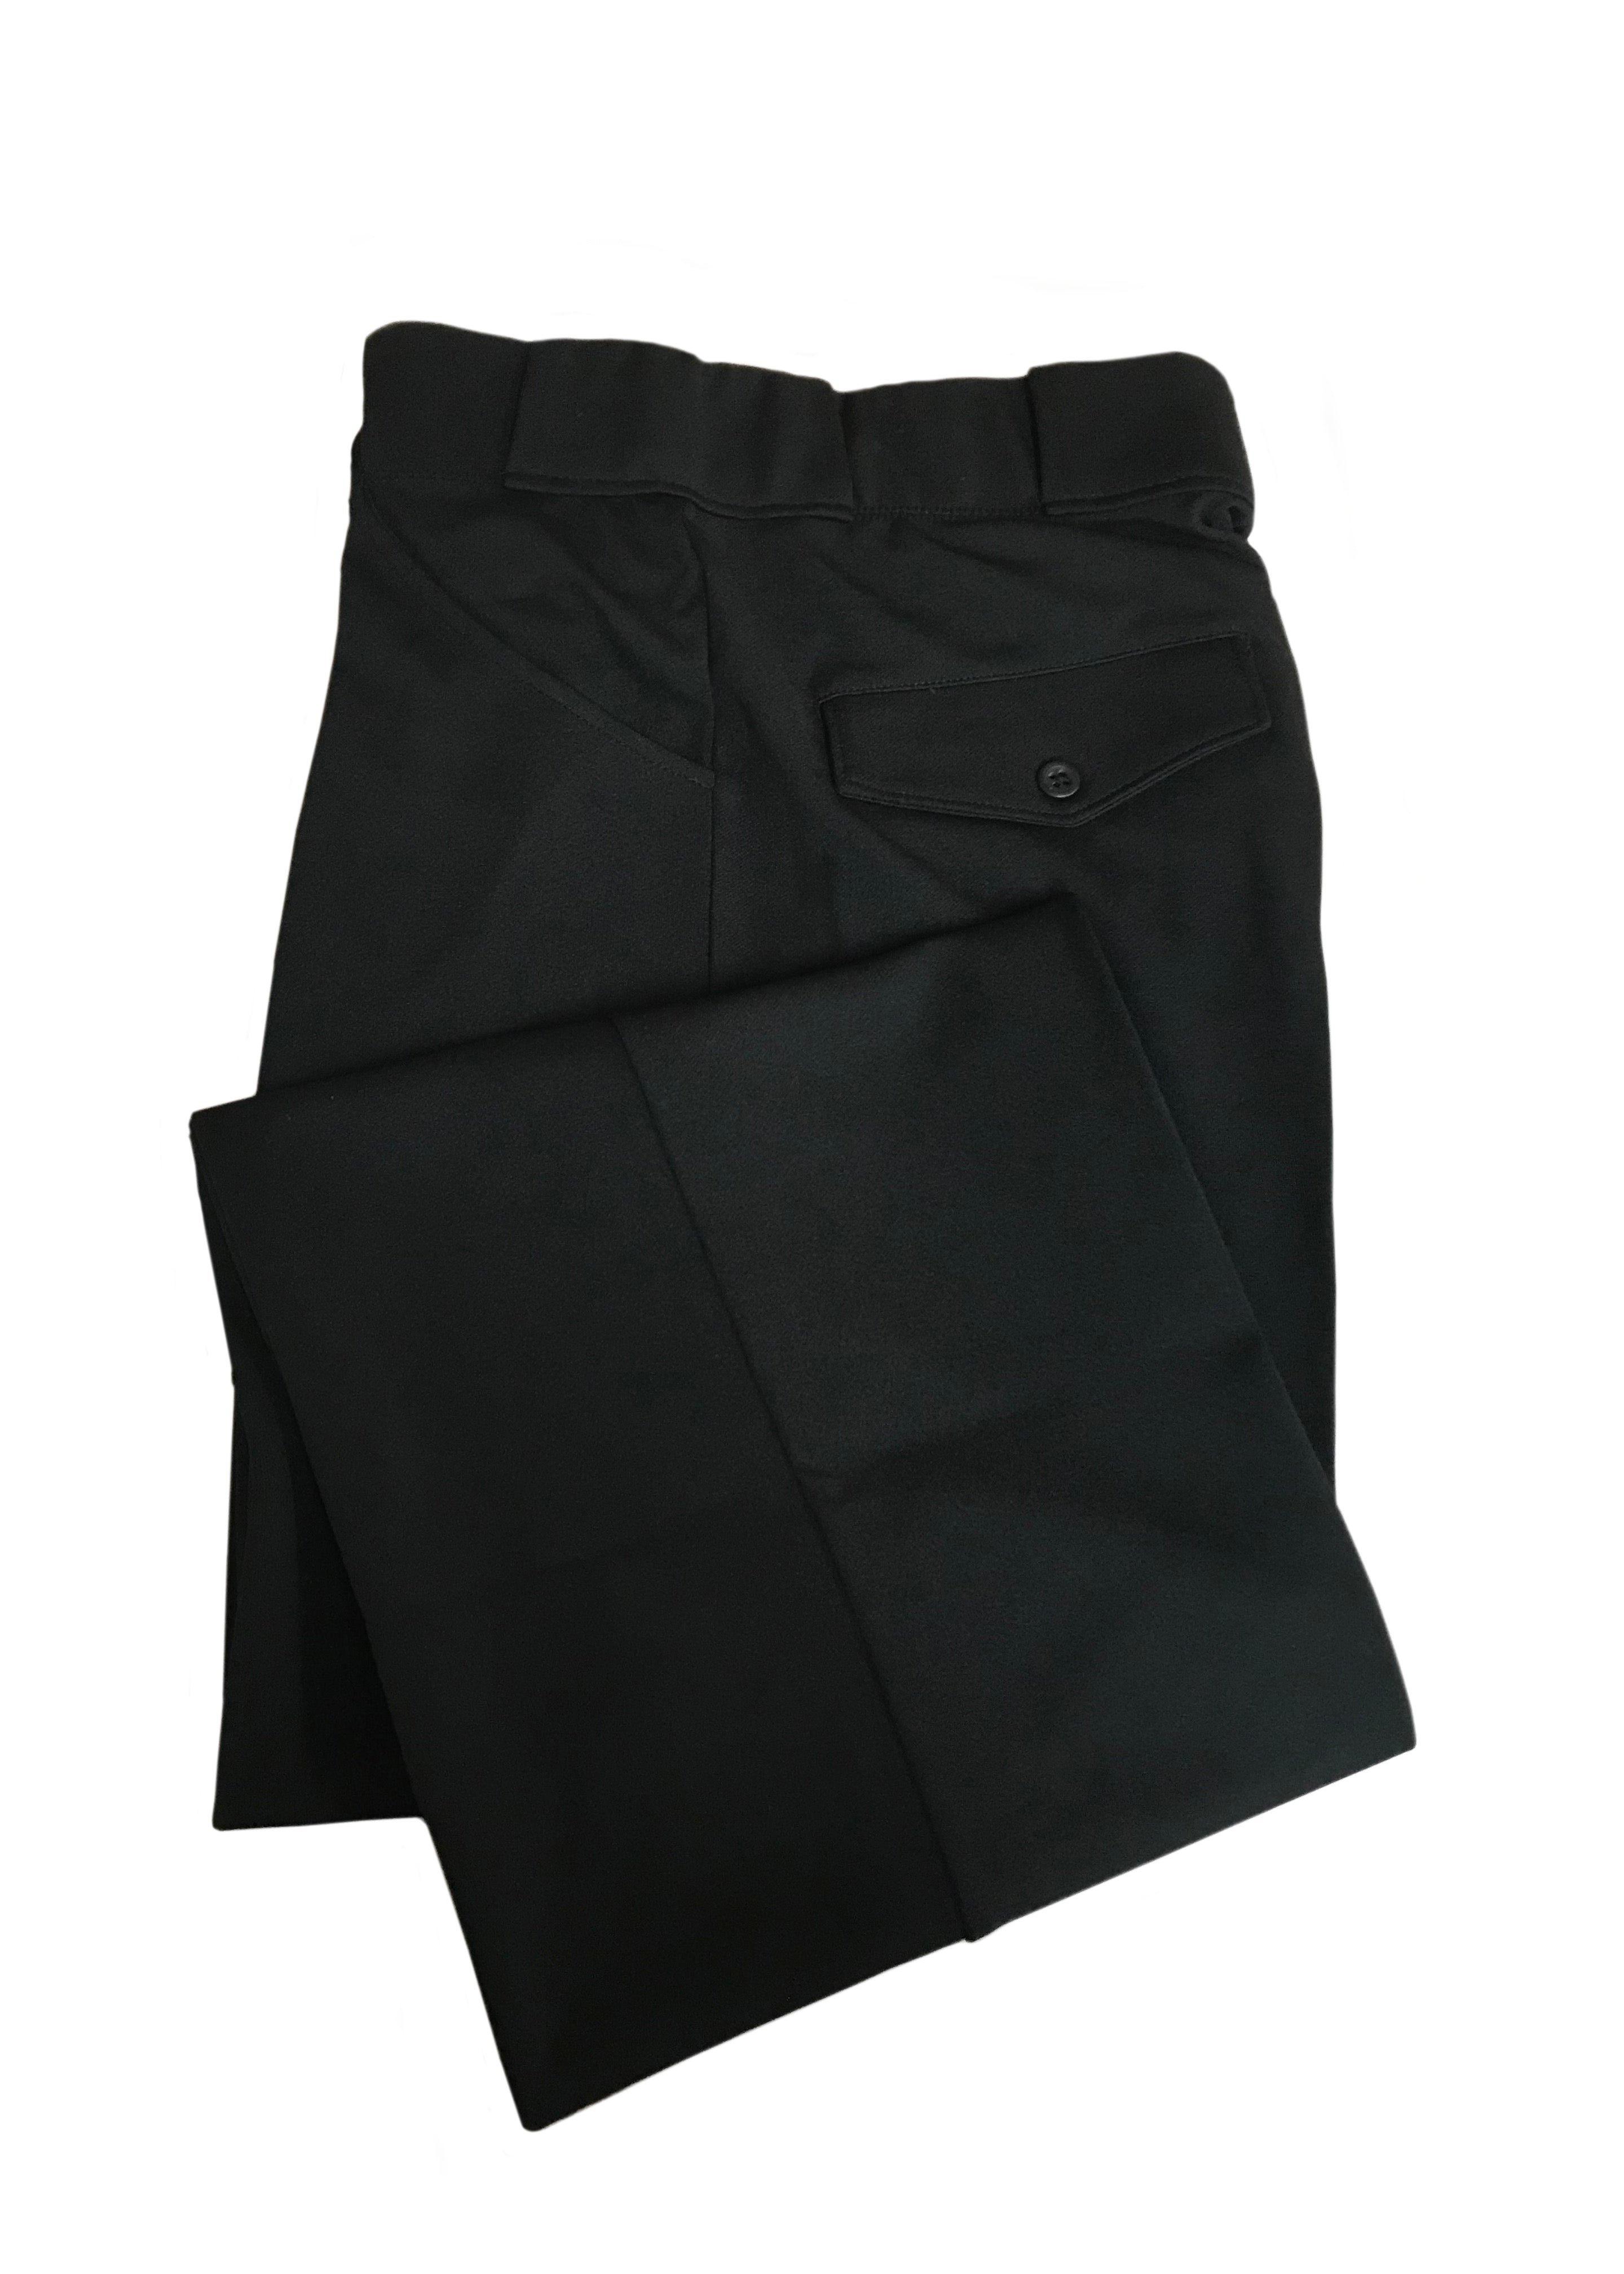 Basketball Referee Pant  Dalco Athletic – Officially Dalco